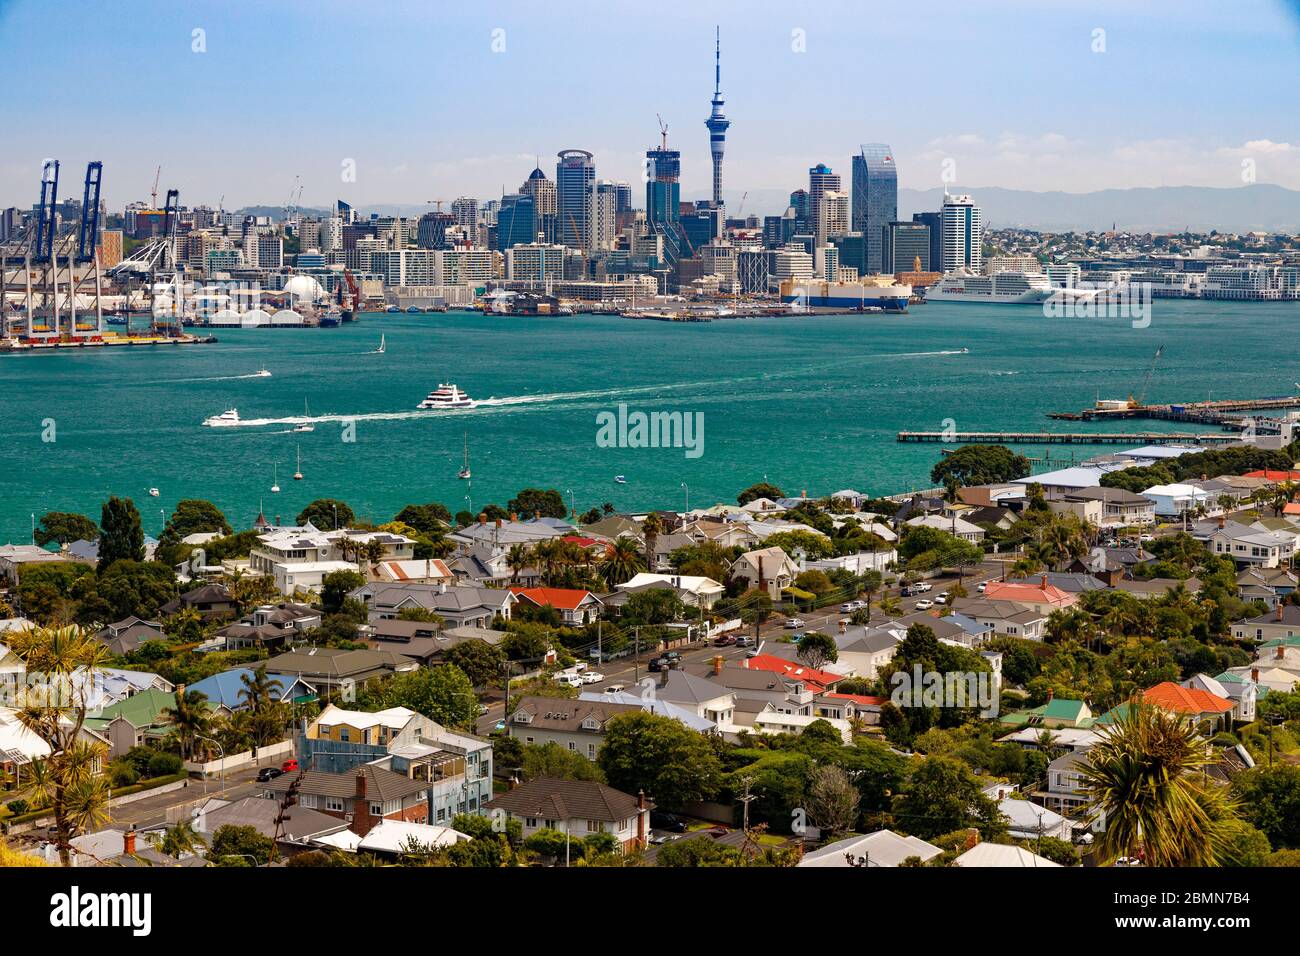 View towards Auckland City from Devonport across Commercial Harbour, New Zrealand. Stock Photo